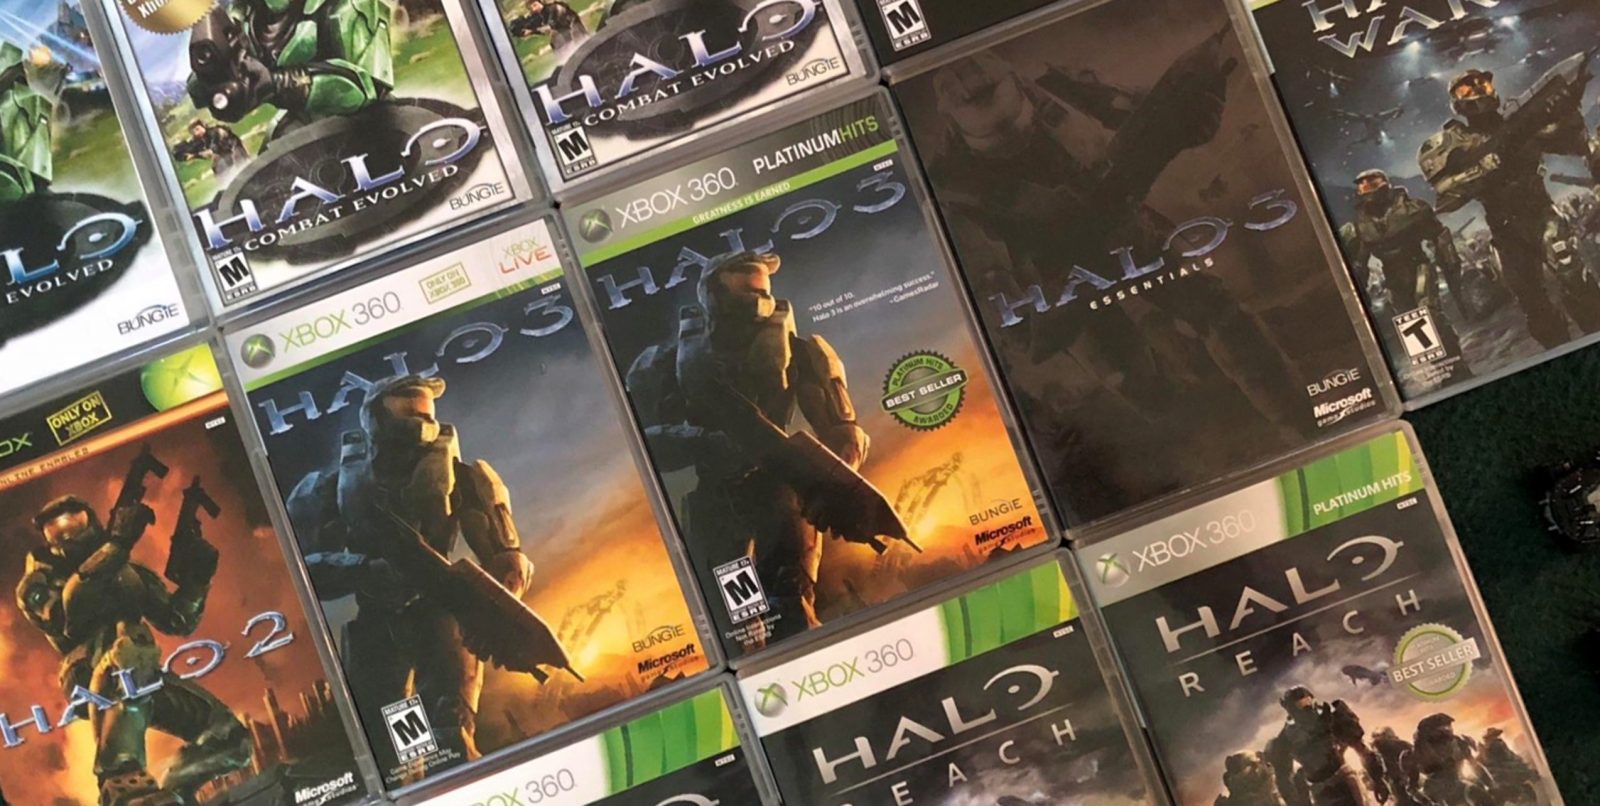 Halo: Combat Evolved on PC sparks fond memories of a simpler time